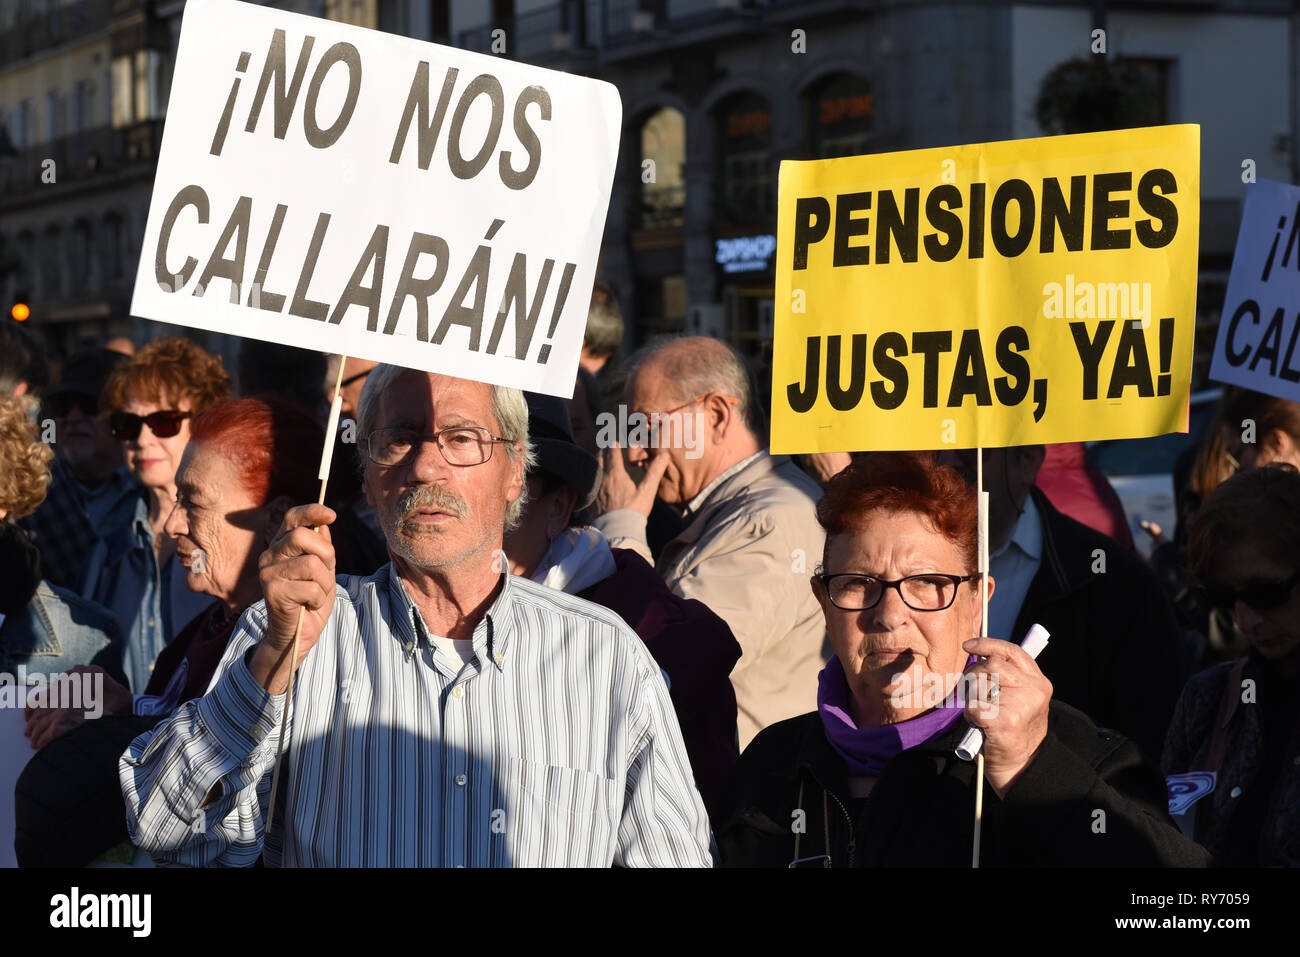 Pensioners are seen holding placards during the protest. Around 300 pensioners gathered at Puerta del Sol in Madrid demanding the Spanish government an increase to their pensions and protest against the cuts in the public services. Stock Photo